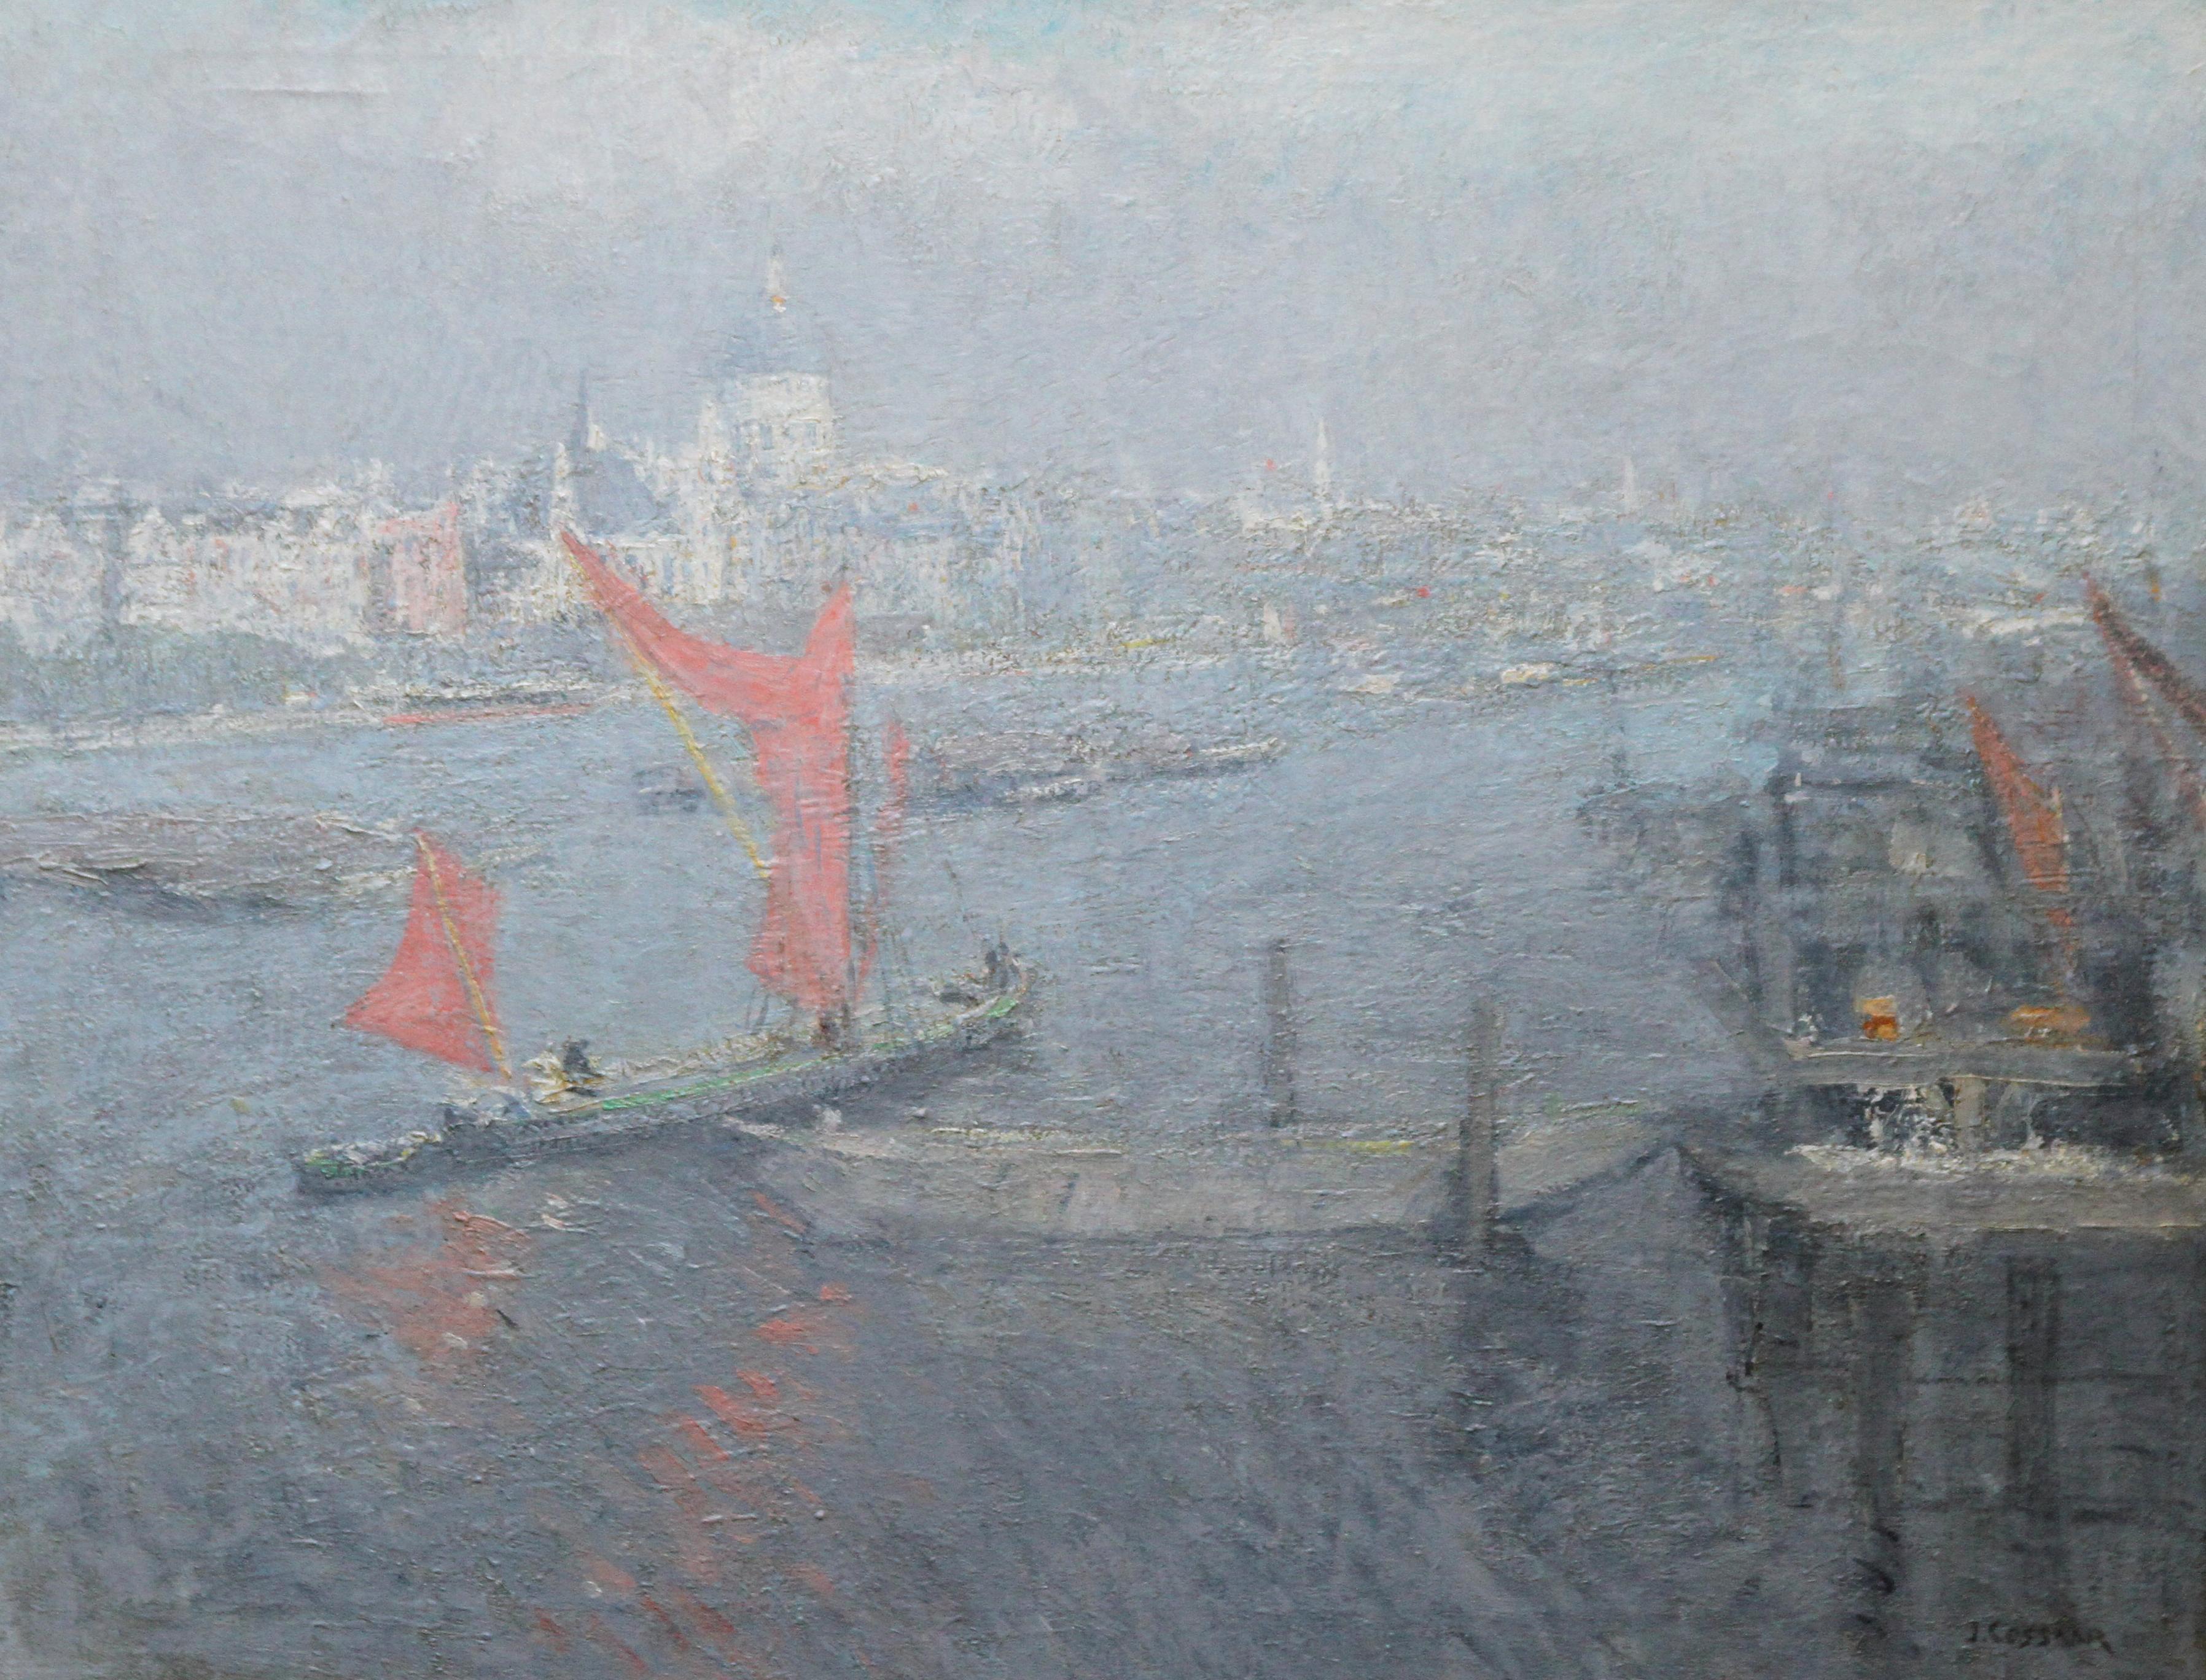 London St Paul's from the Thames - Impressionist 1920s landscape oil painting - Painting by Jacobus Cossaar